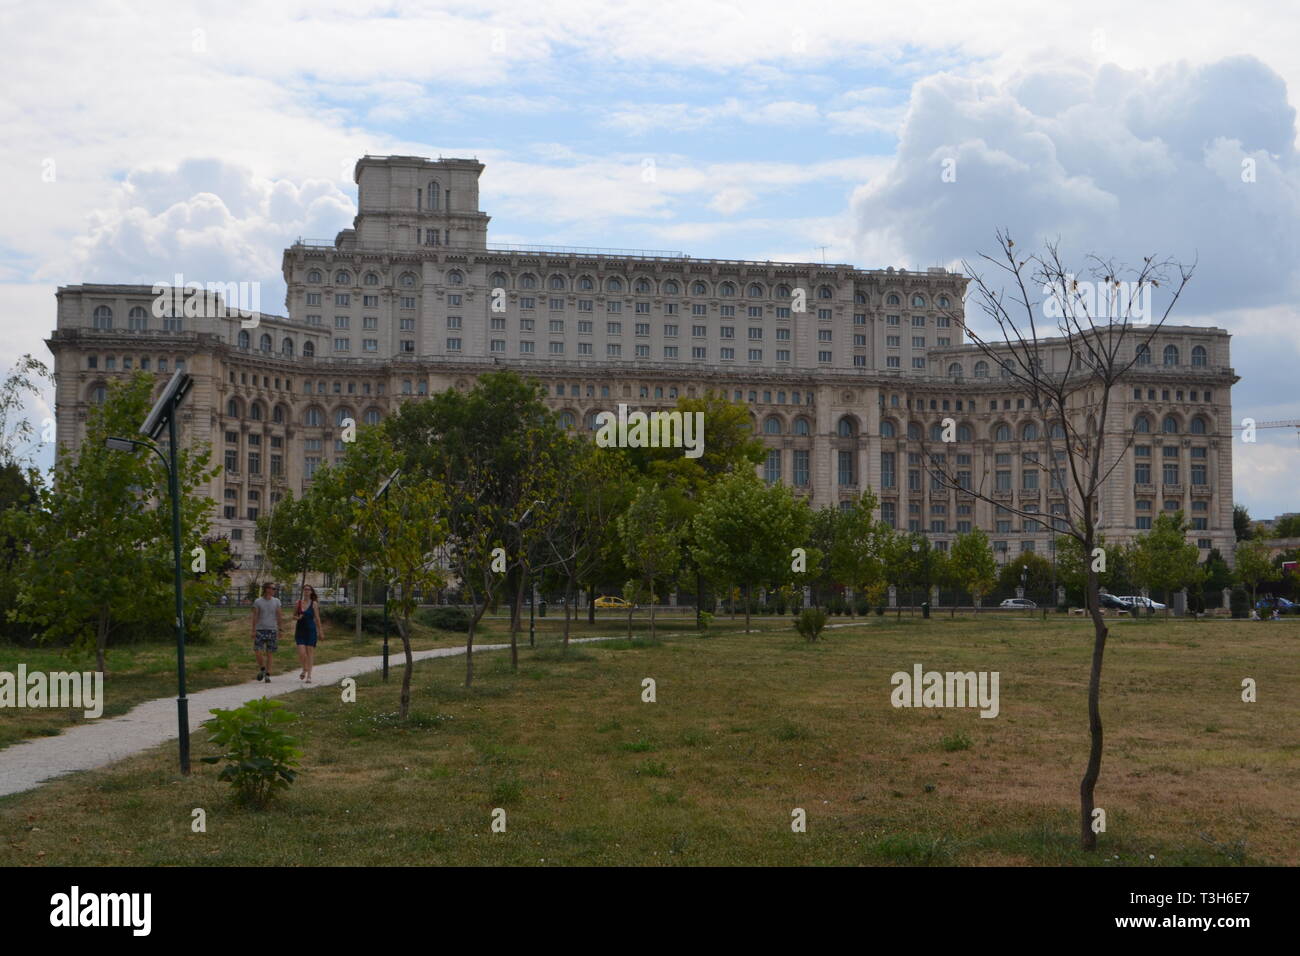 Palace of Parliament, created by Nicolae Ceausescu, Bucharest, Romania. Has 3000 rooms and covers 330'000 sq metres. Stock Photo